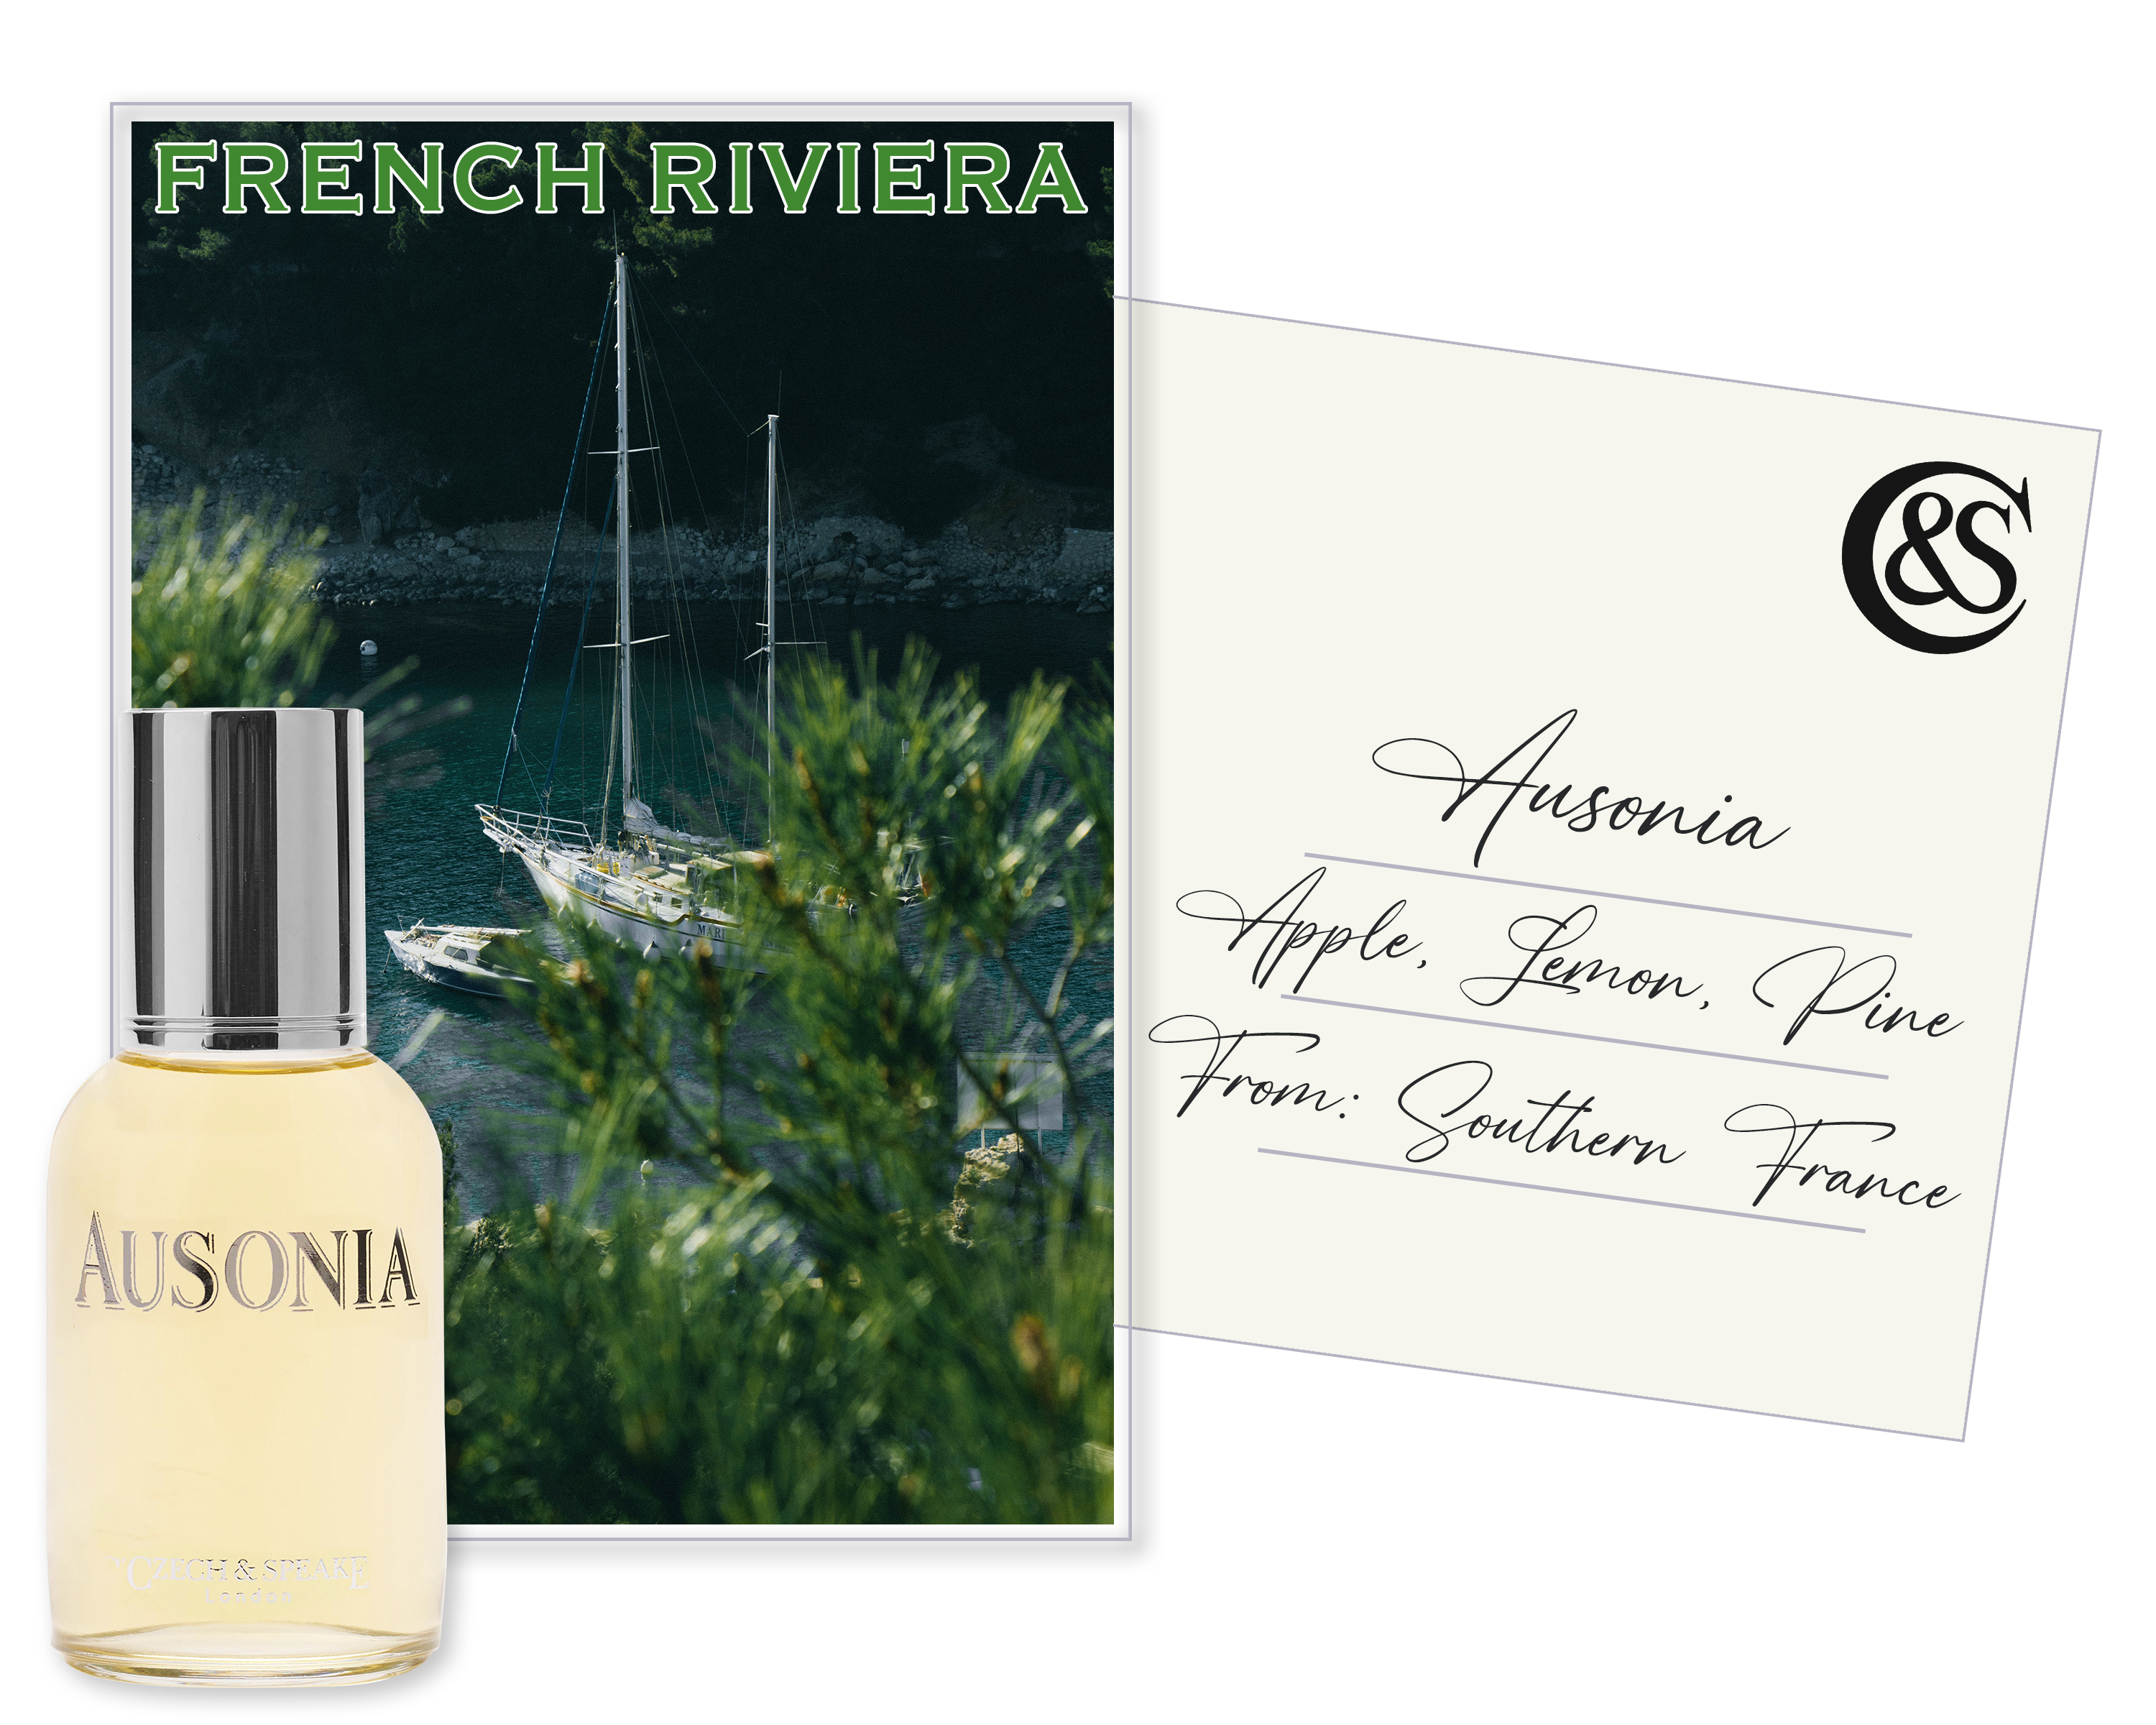 Ausonia 50ml bottle overlaid on a postcard showing the French Riviera, with Ausonia and its fragrance notes on the reverse